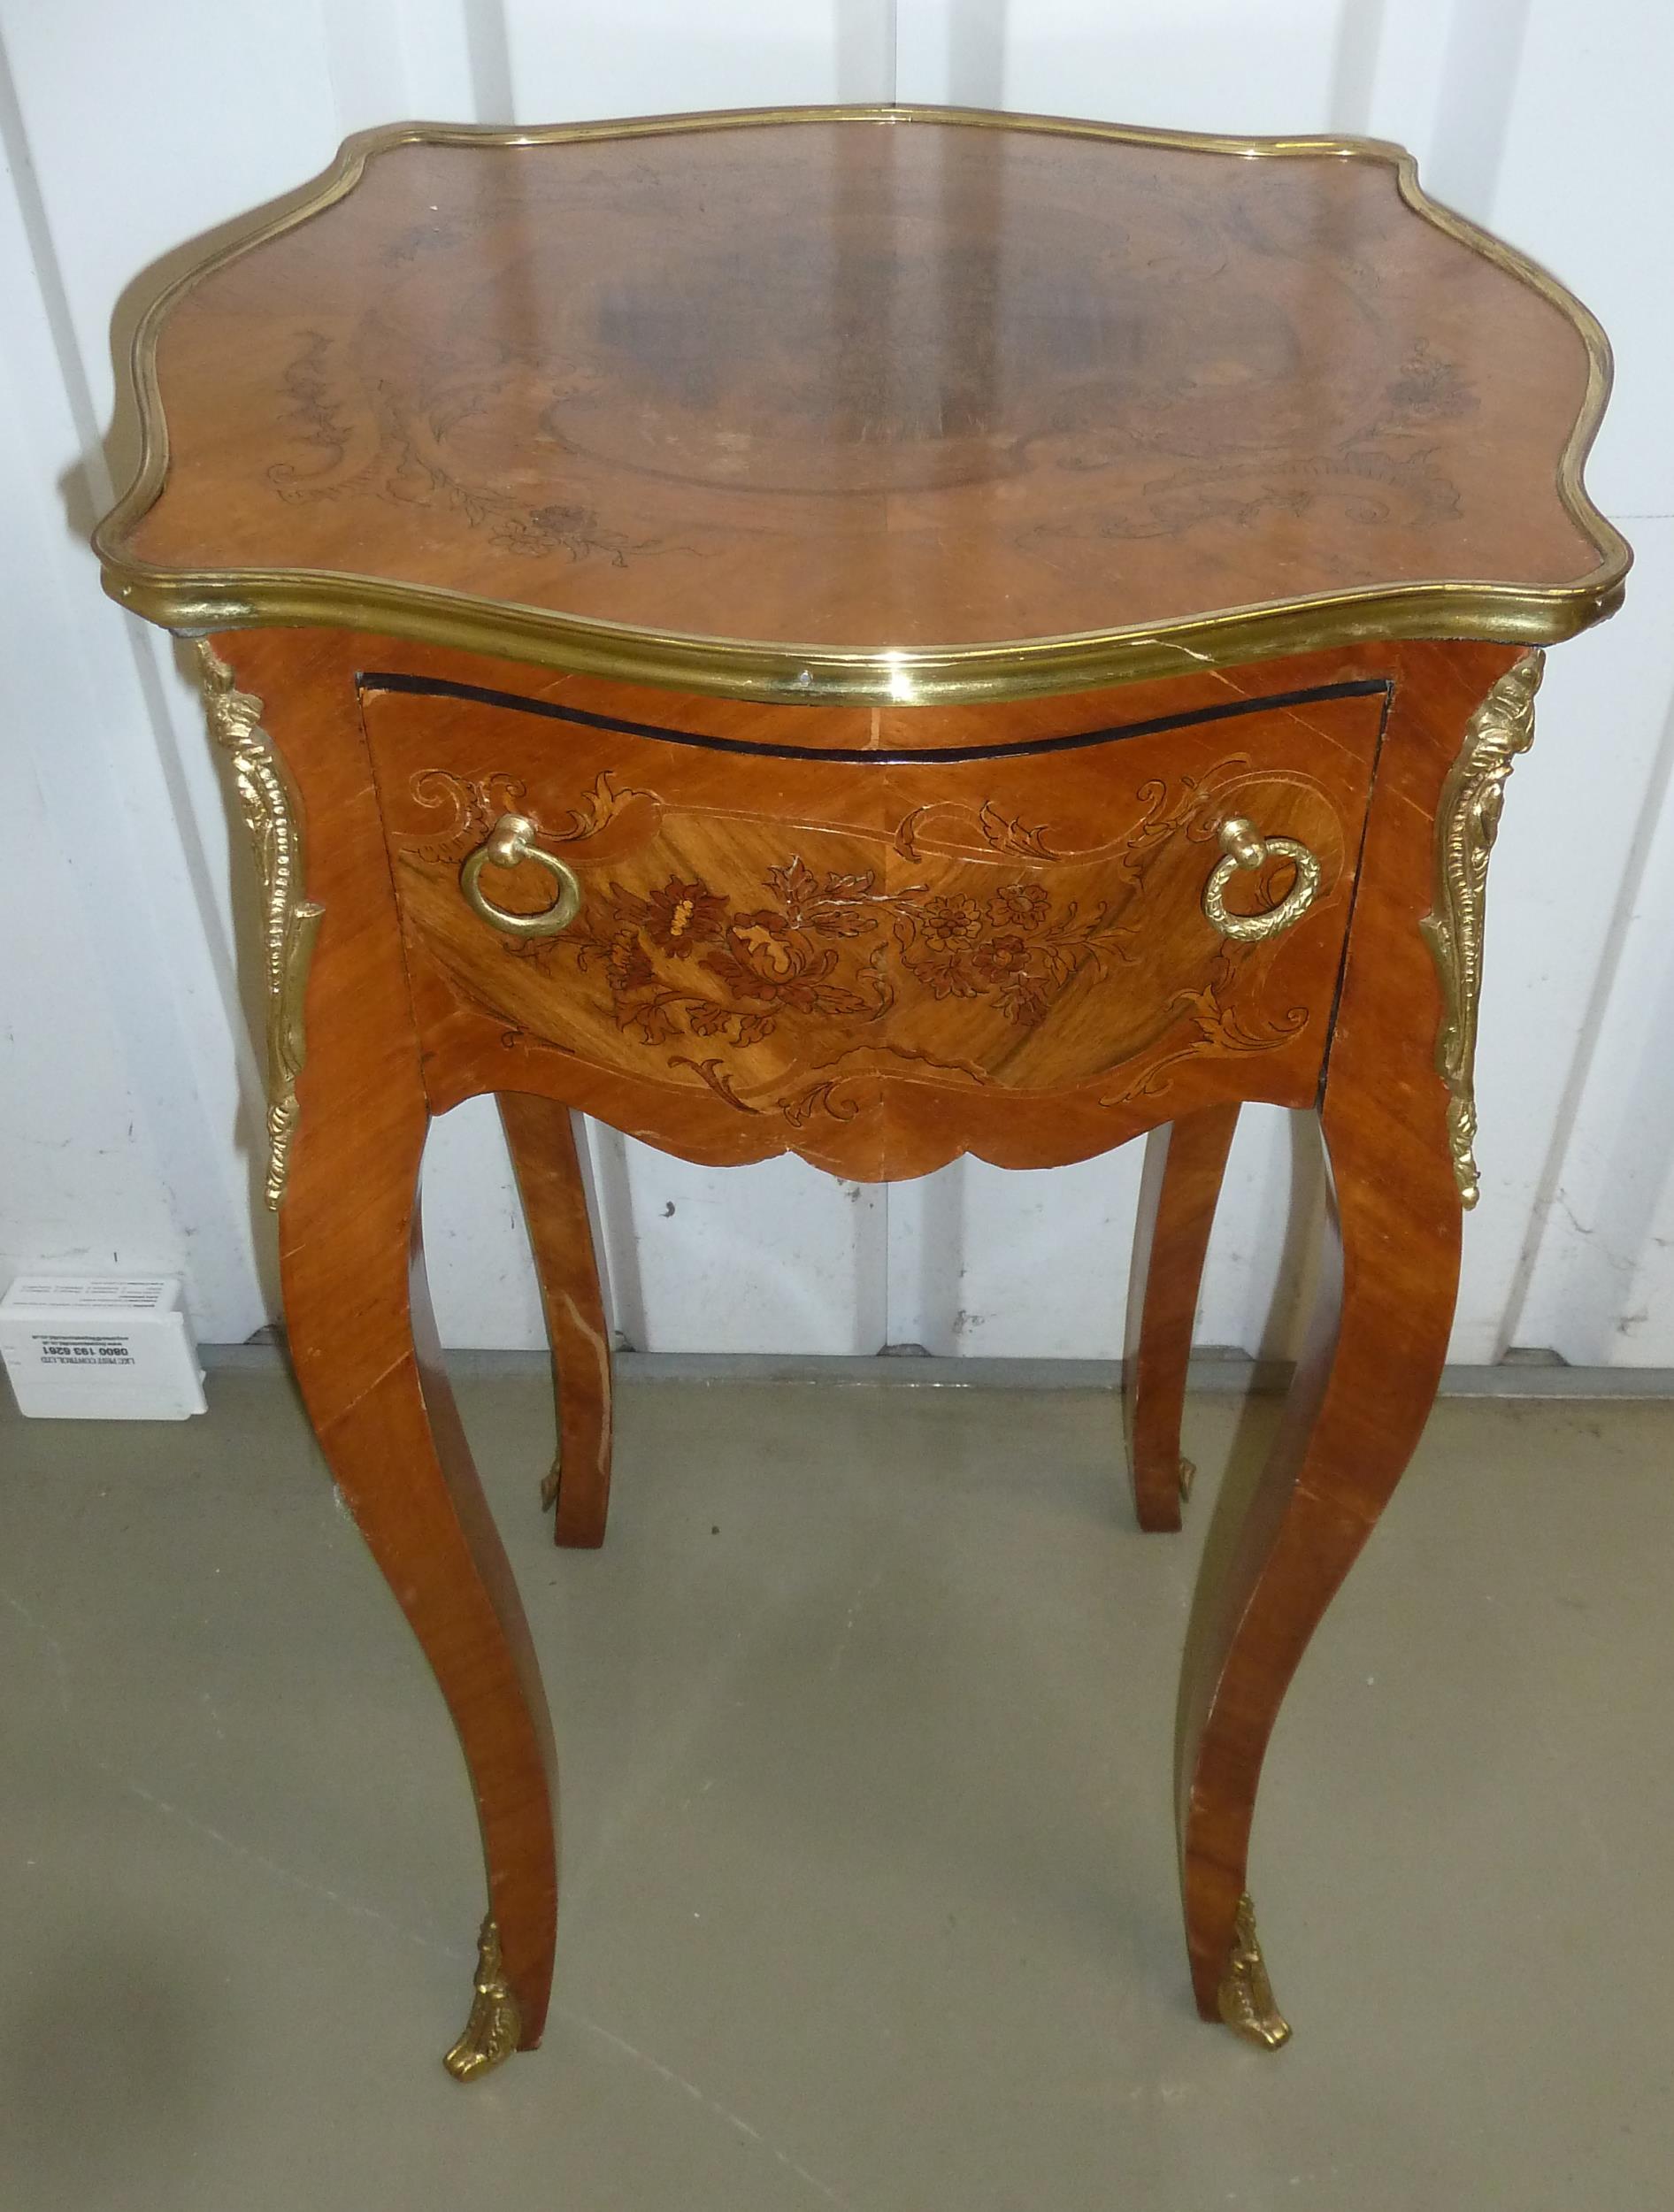 An inlaid mahogany rectangular side table with gilded metal mounts and a single drawer on four